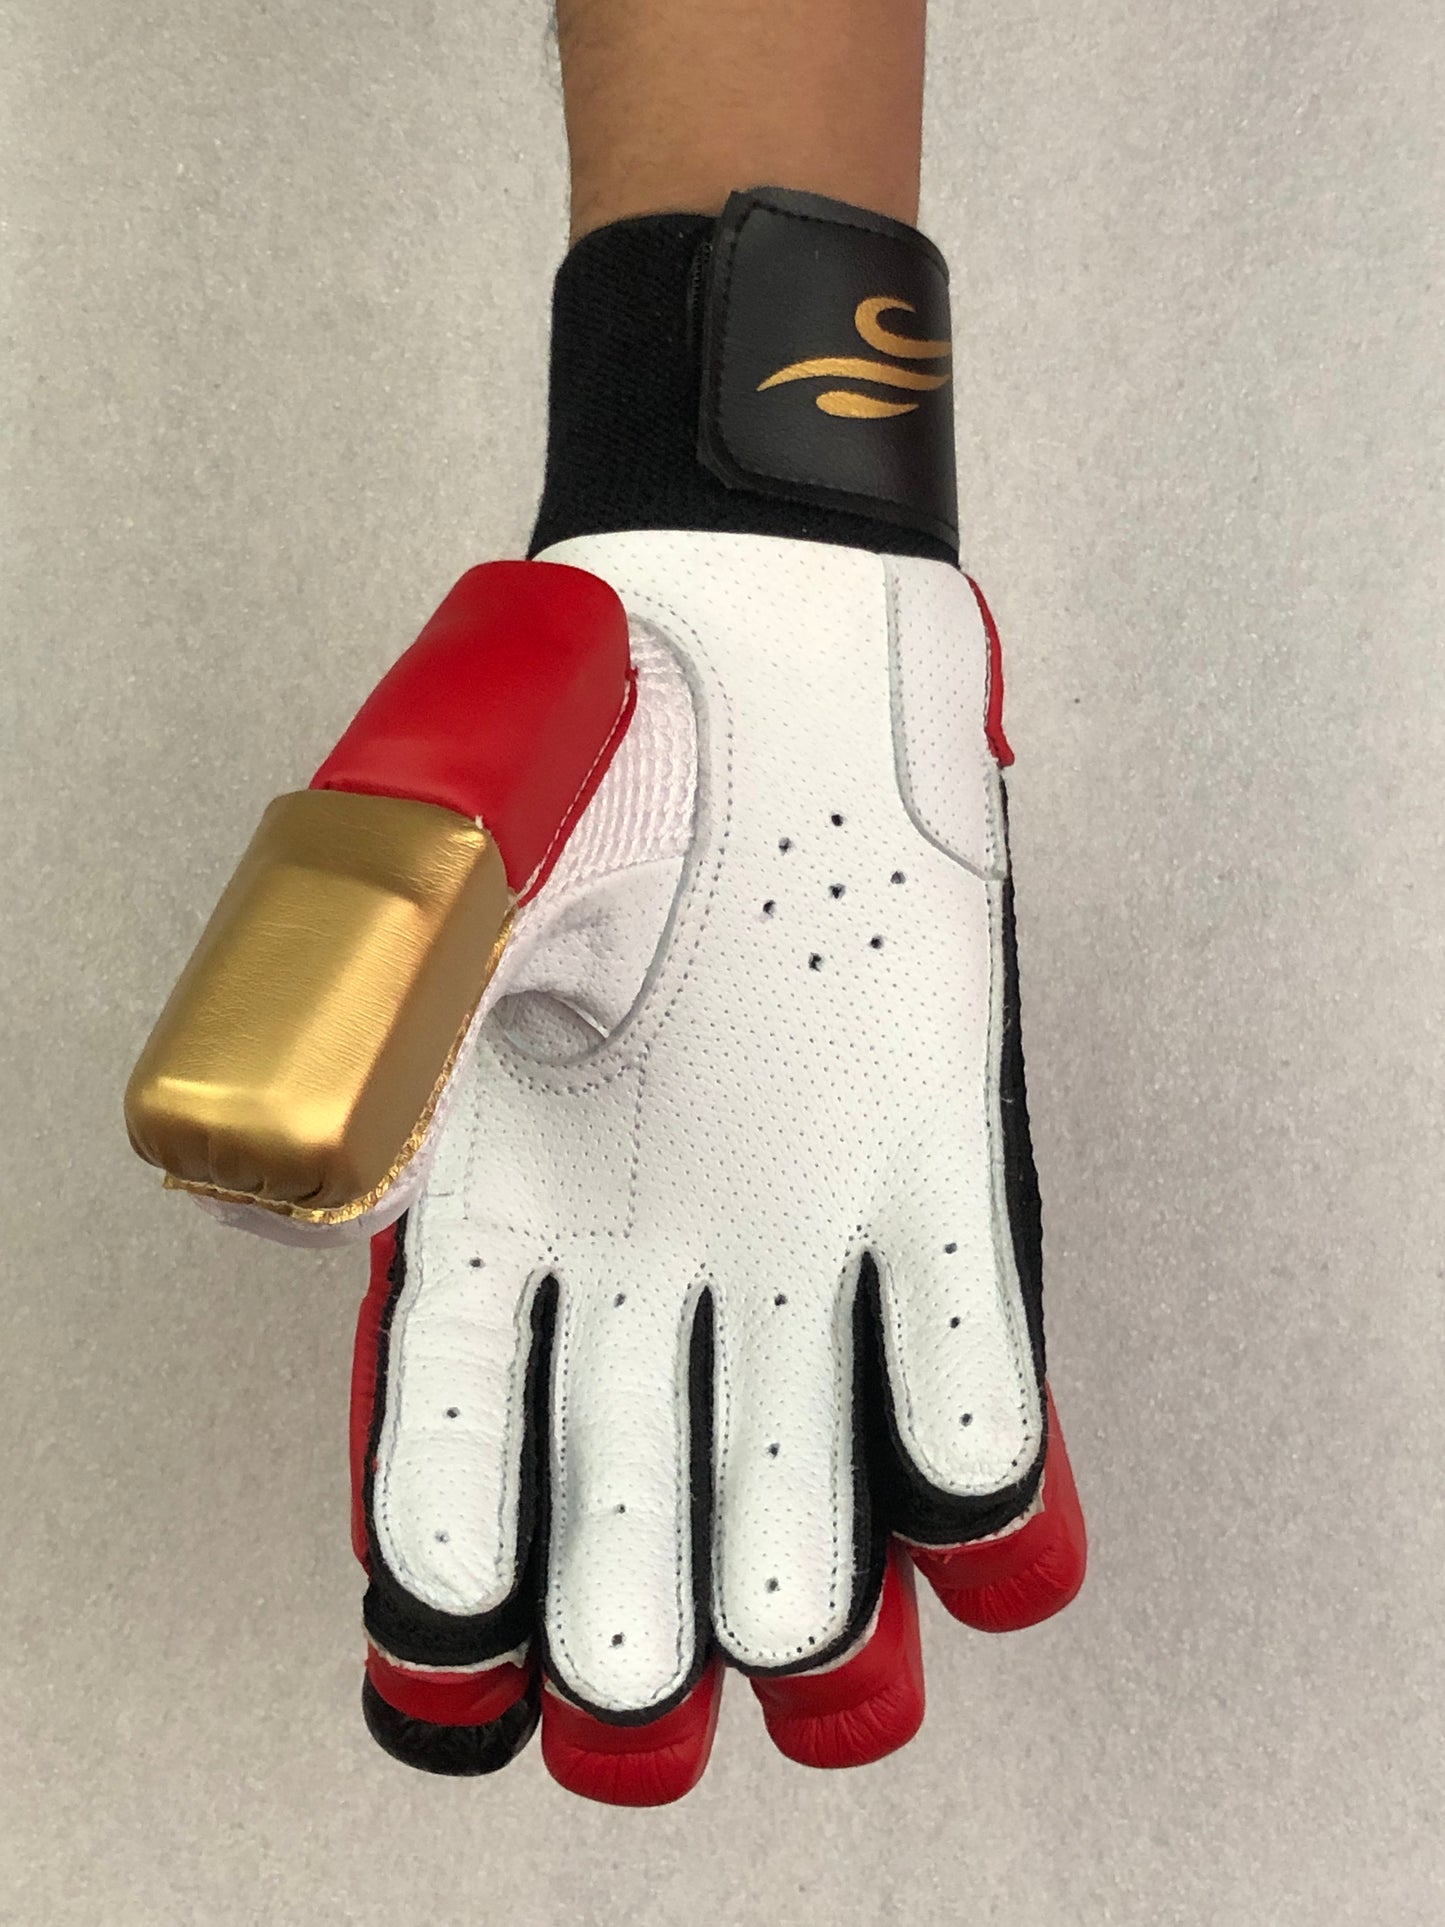 Red/Gold Cricket Batting Gloves by Black Ash - FREE SHIPPING